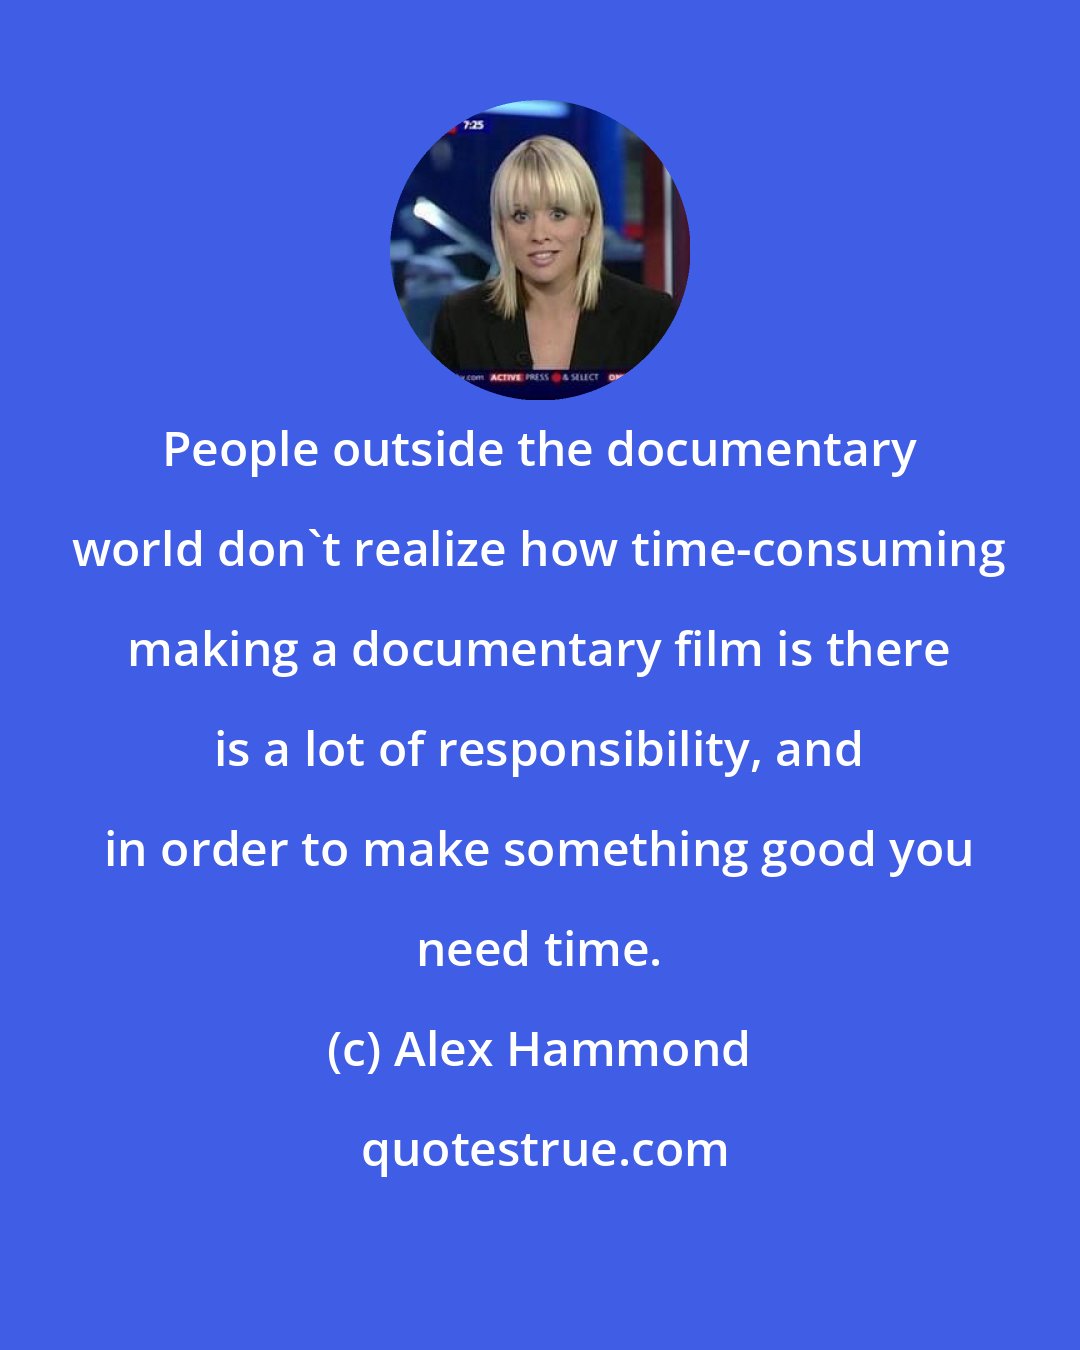 Alex Hammond: People outside the documentary world don't realize how time-consuming making a documentary film is there is a lot of responsibility, and in order to make something good you need time.